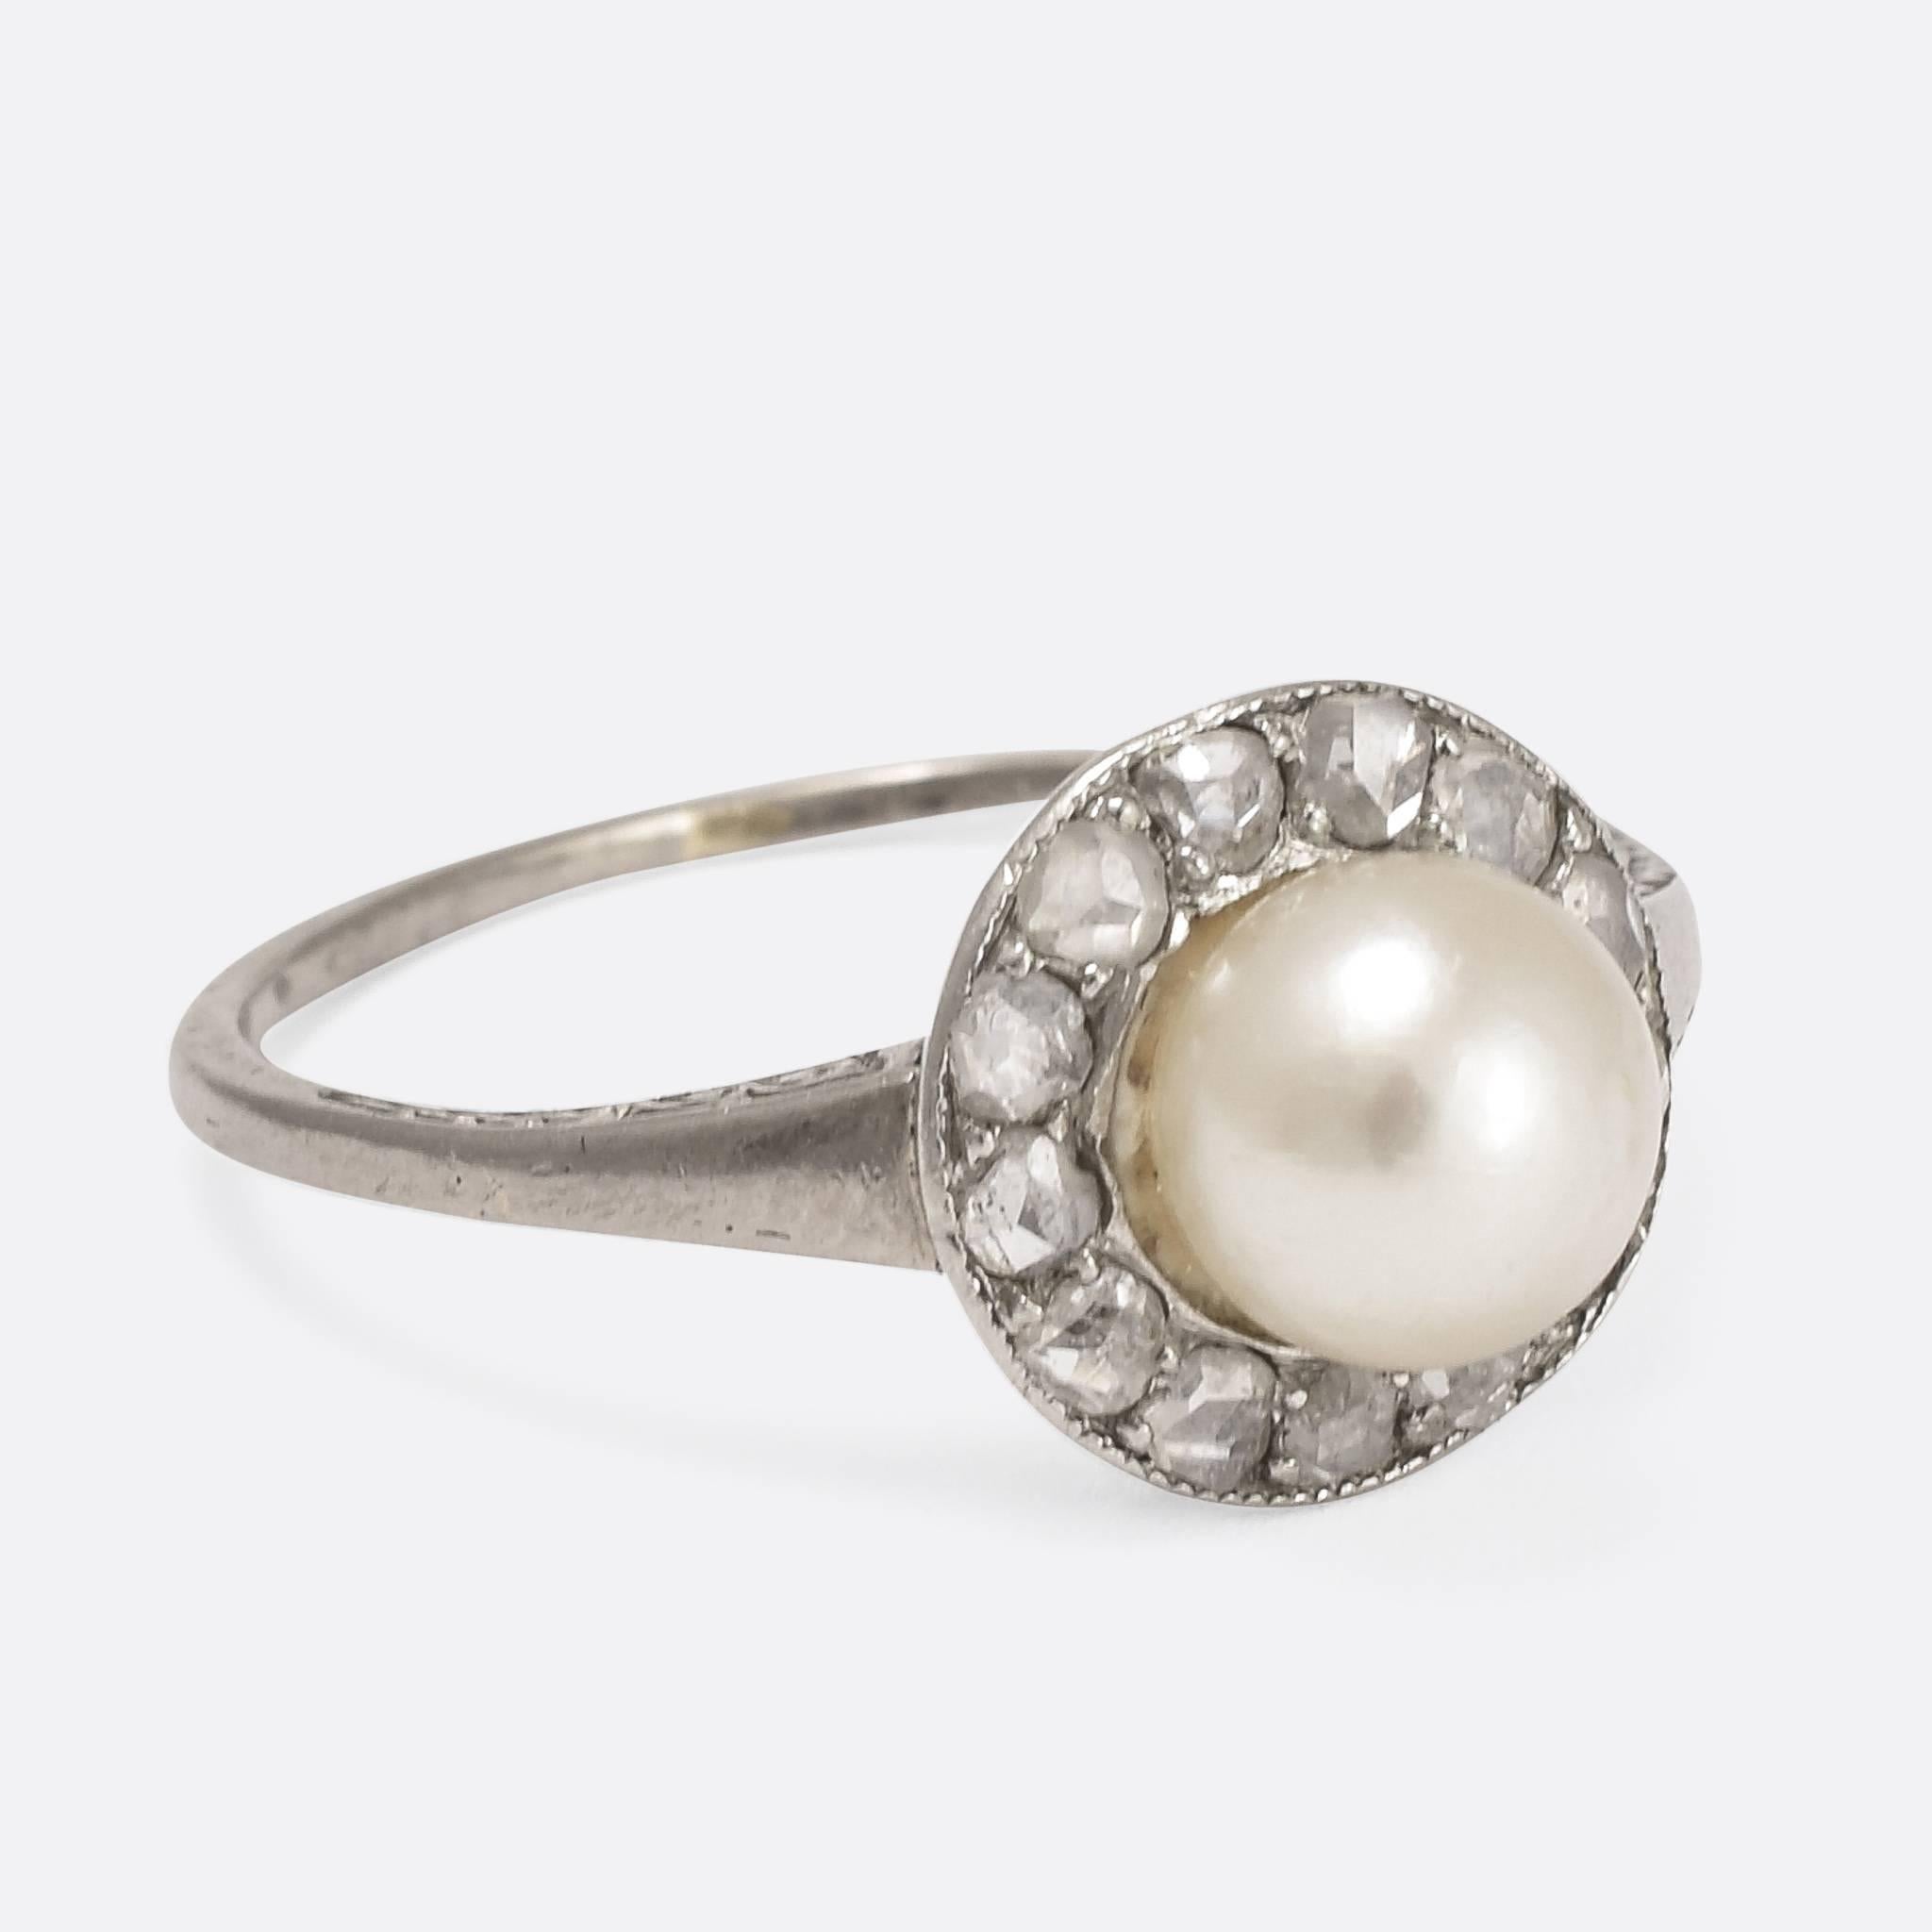 Superb Art Deco period cluster ring, set with a 6.2mm natural pearl surrounded by a halo of glistening rose cut diamonds. The ring is modelled in platinum, and features pretty hand-chased detail to the shoulders and a galleried head. Ring Size: US: